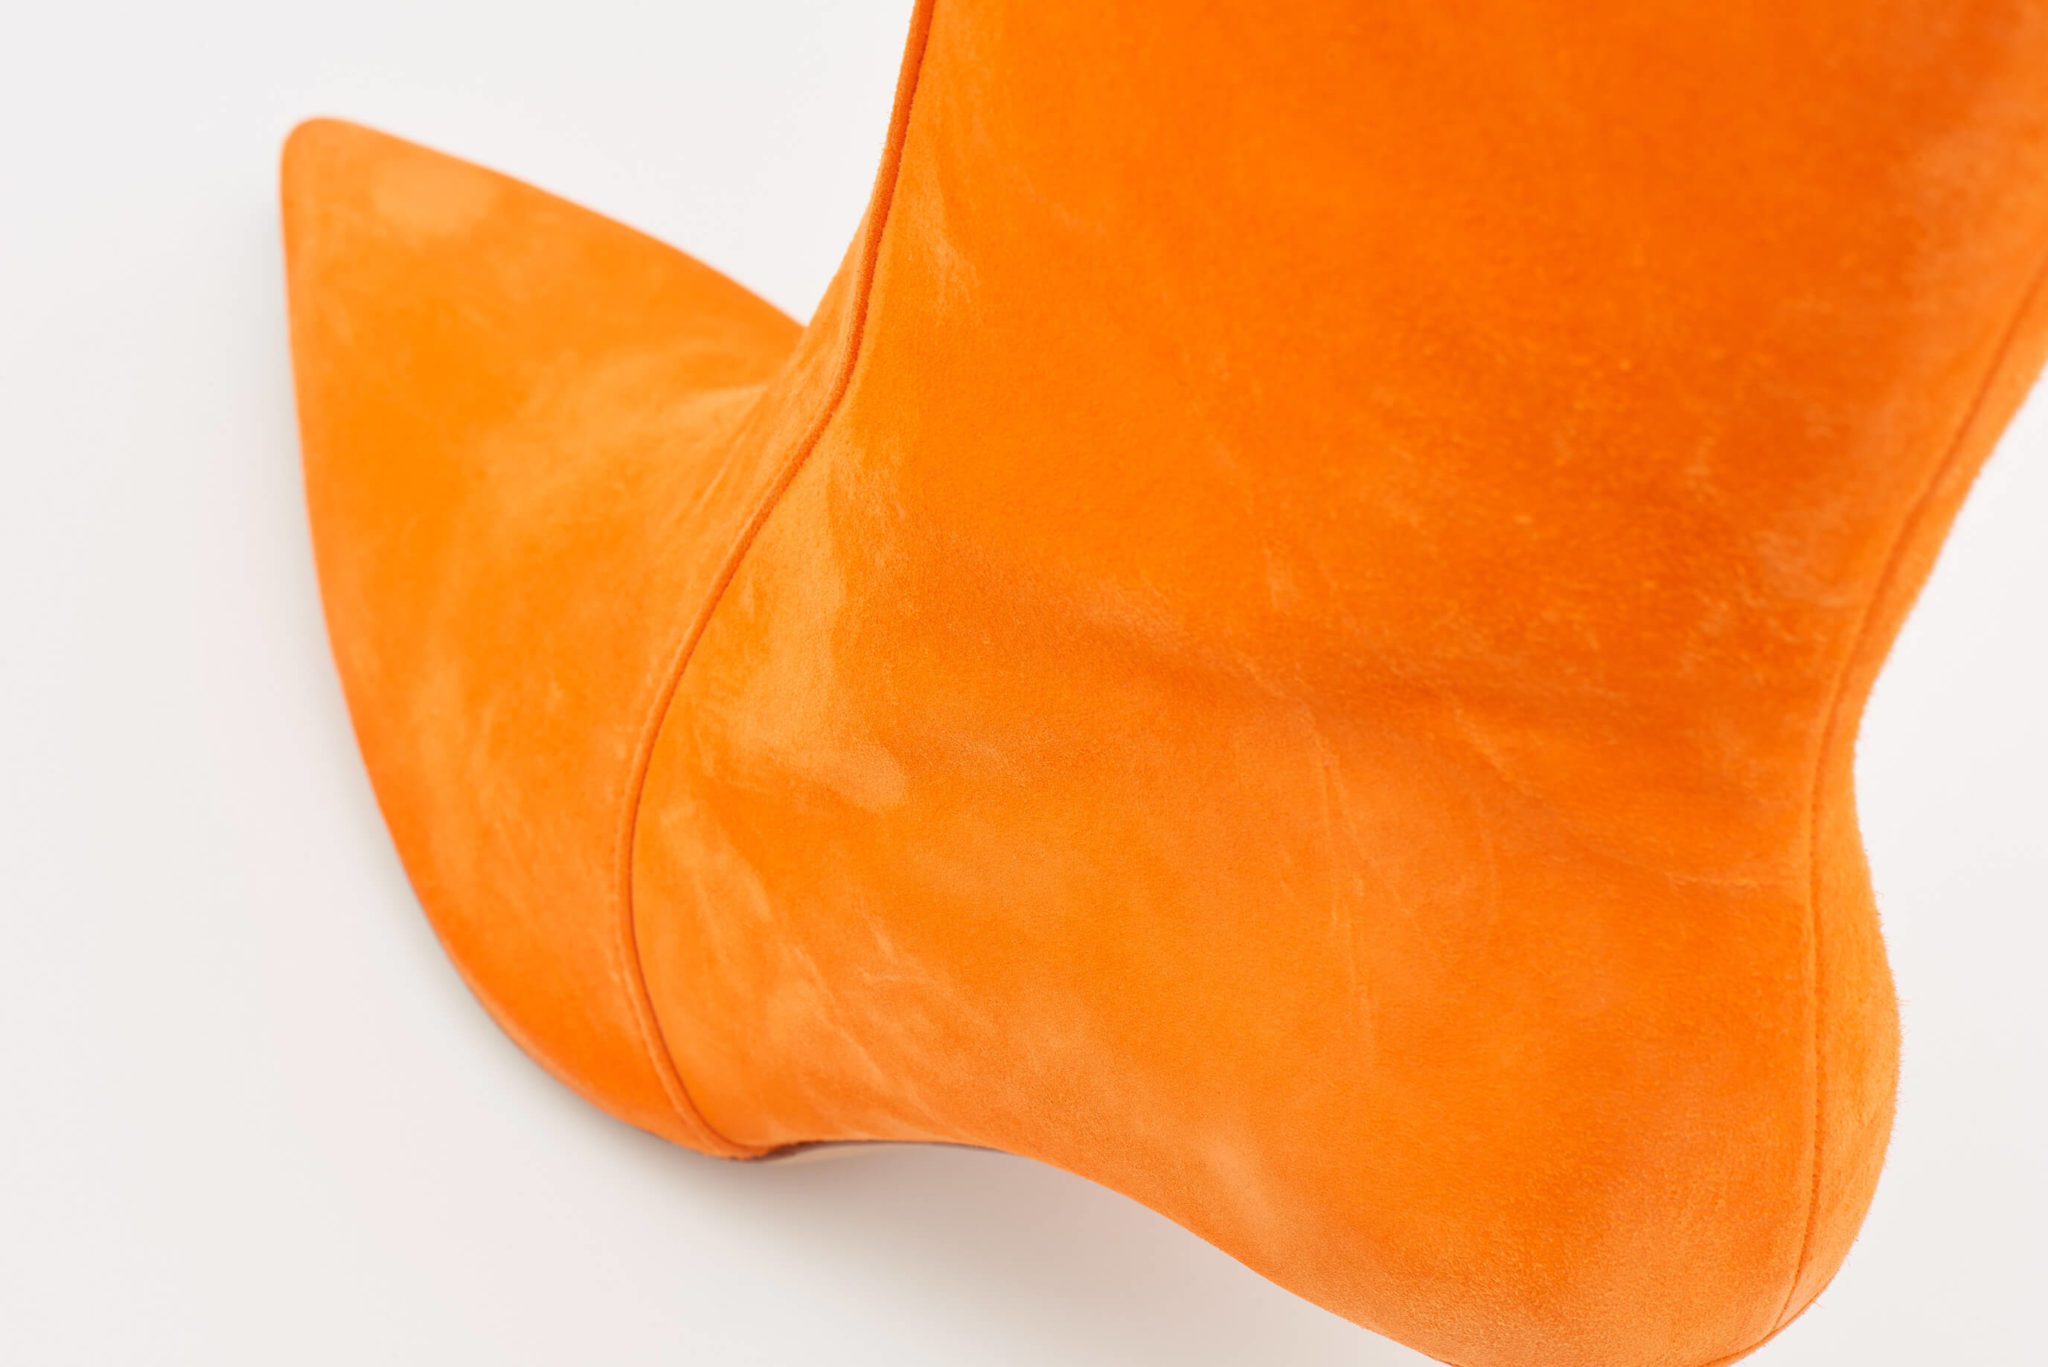 Orange Suede Knee High Boots -Luis Onofre Portuguese Shoes FW22